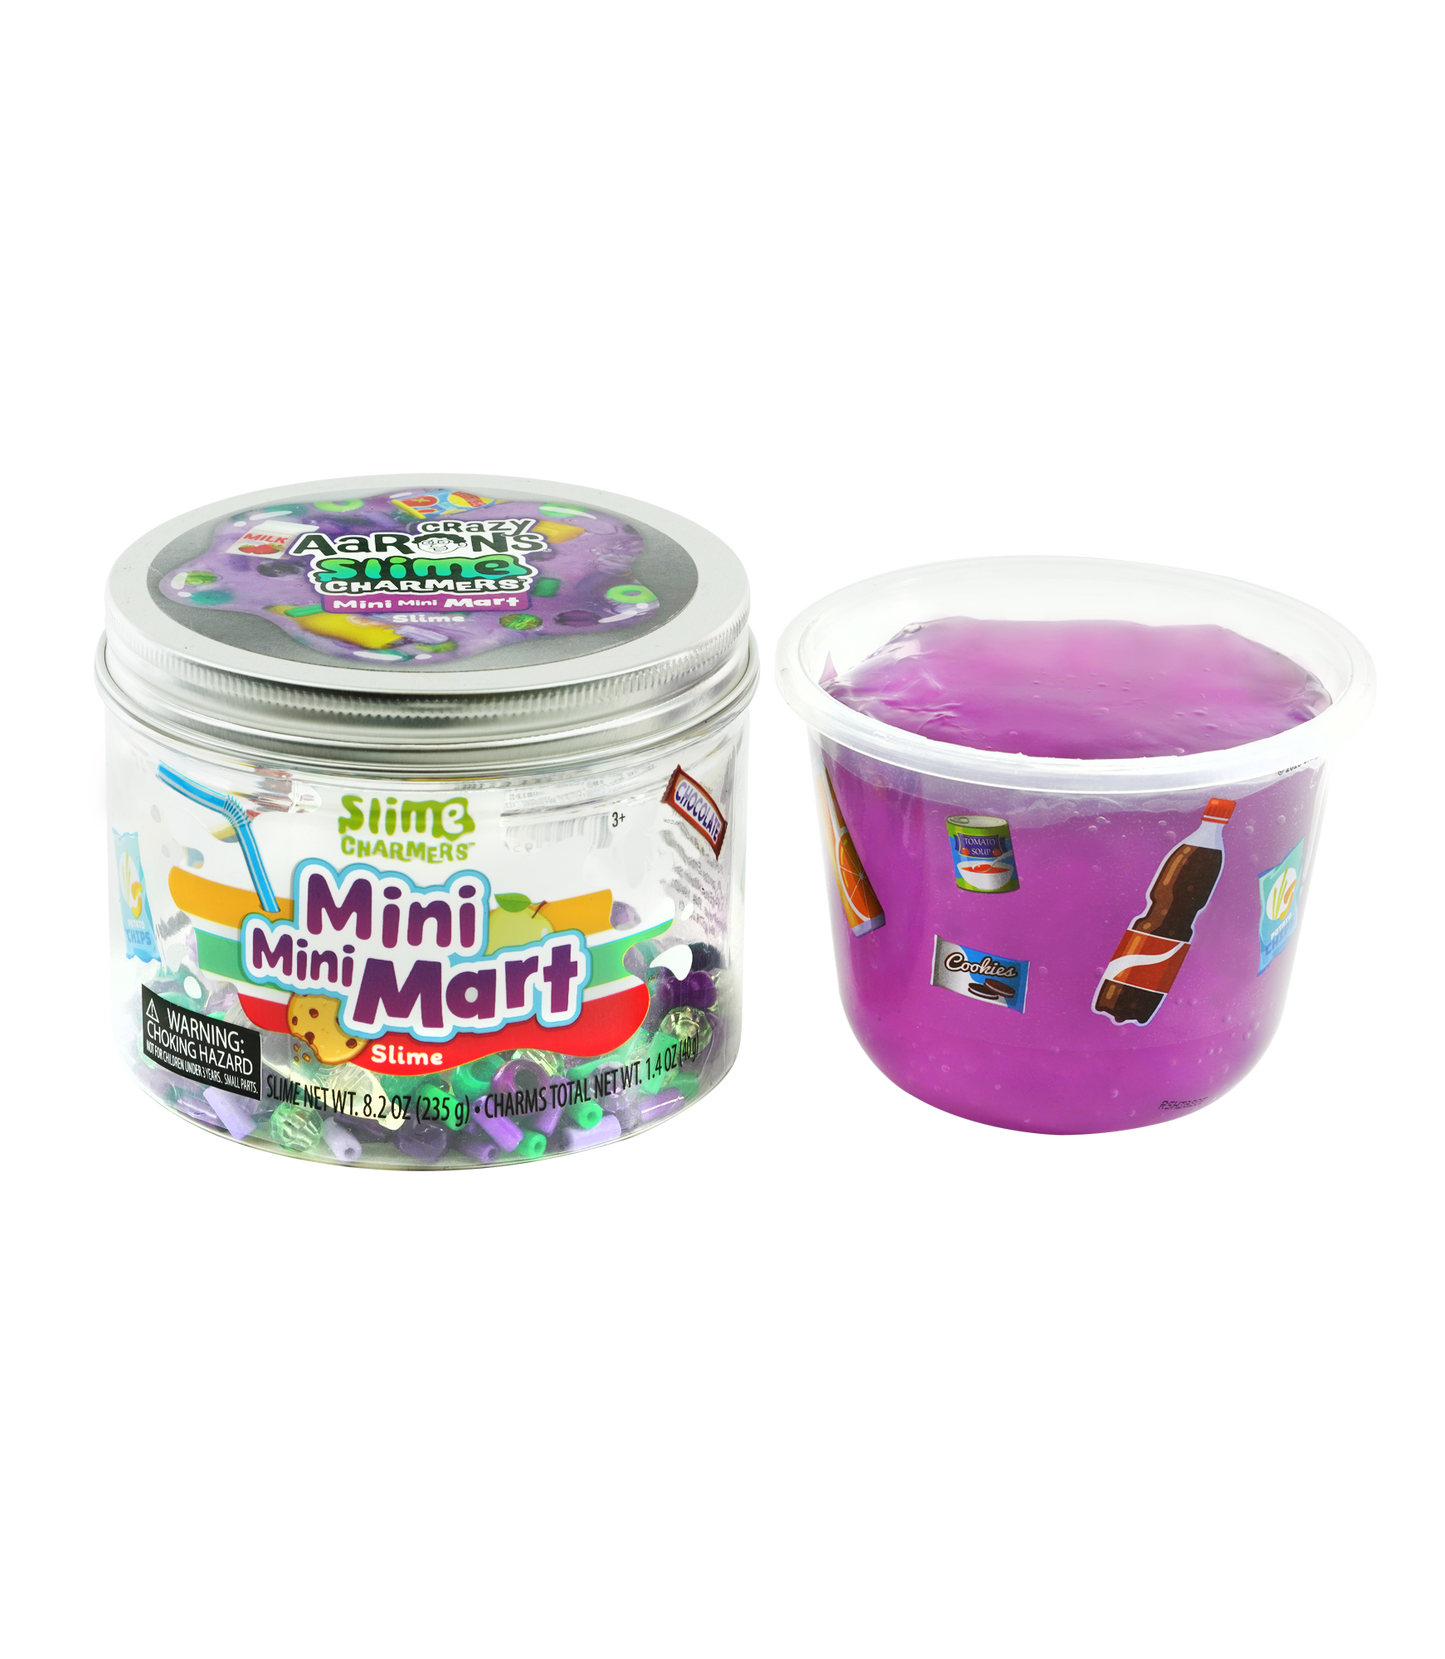 Mini Mart Slime Charmers by Crazy Aaron’s Thinking Putty #SLM004